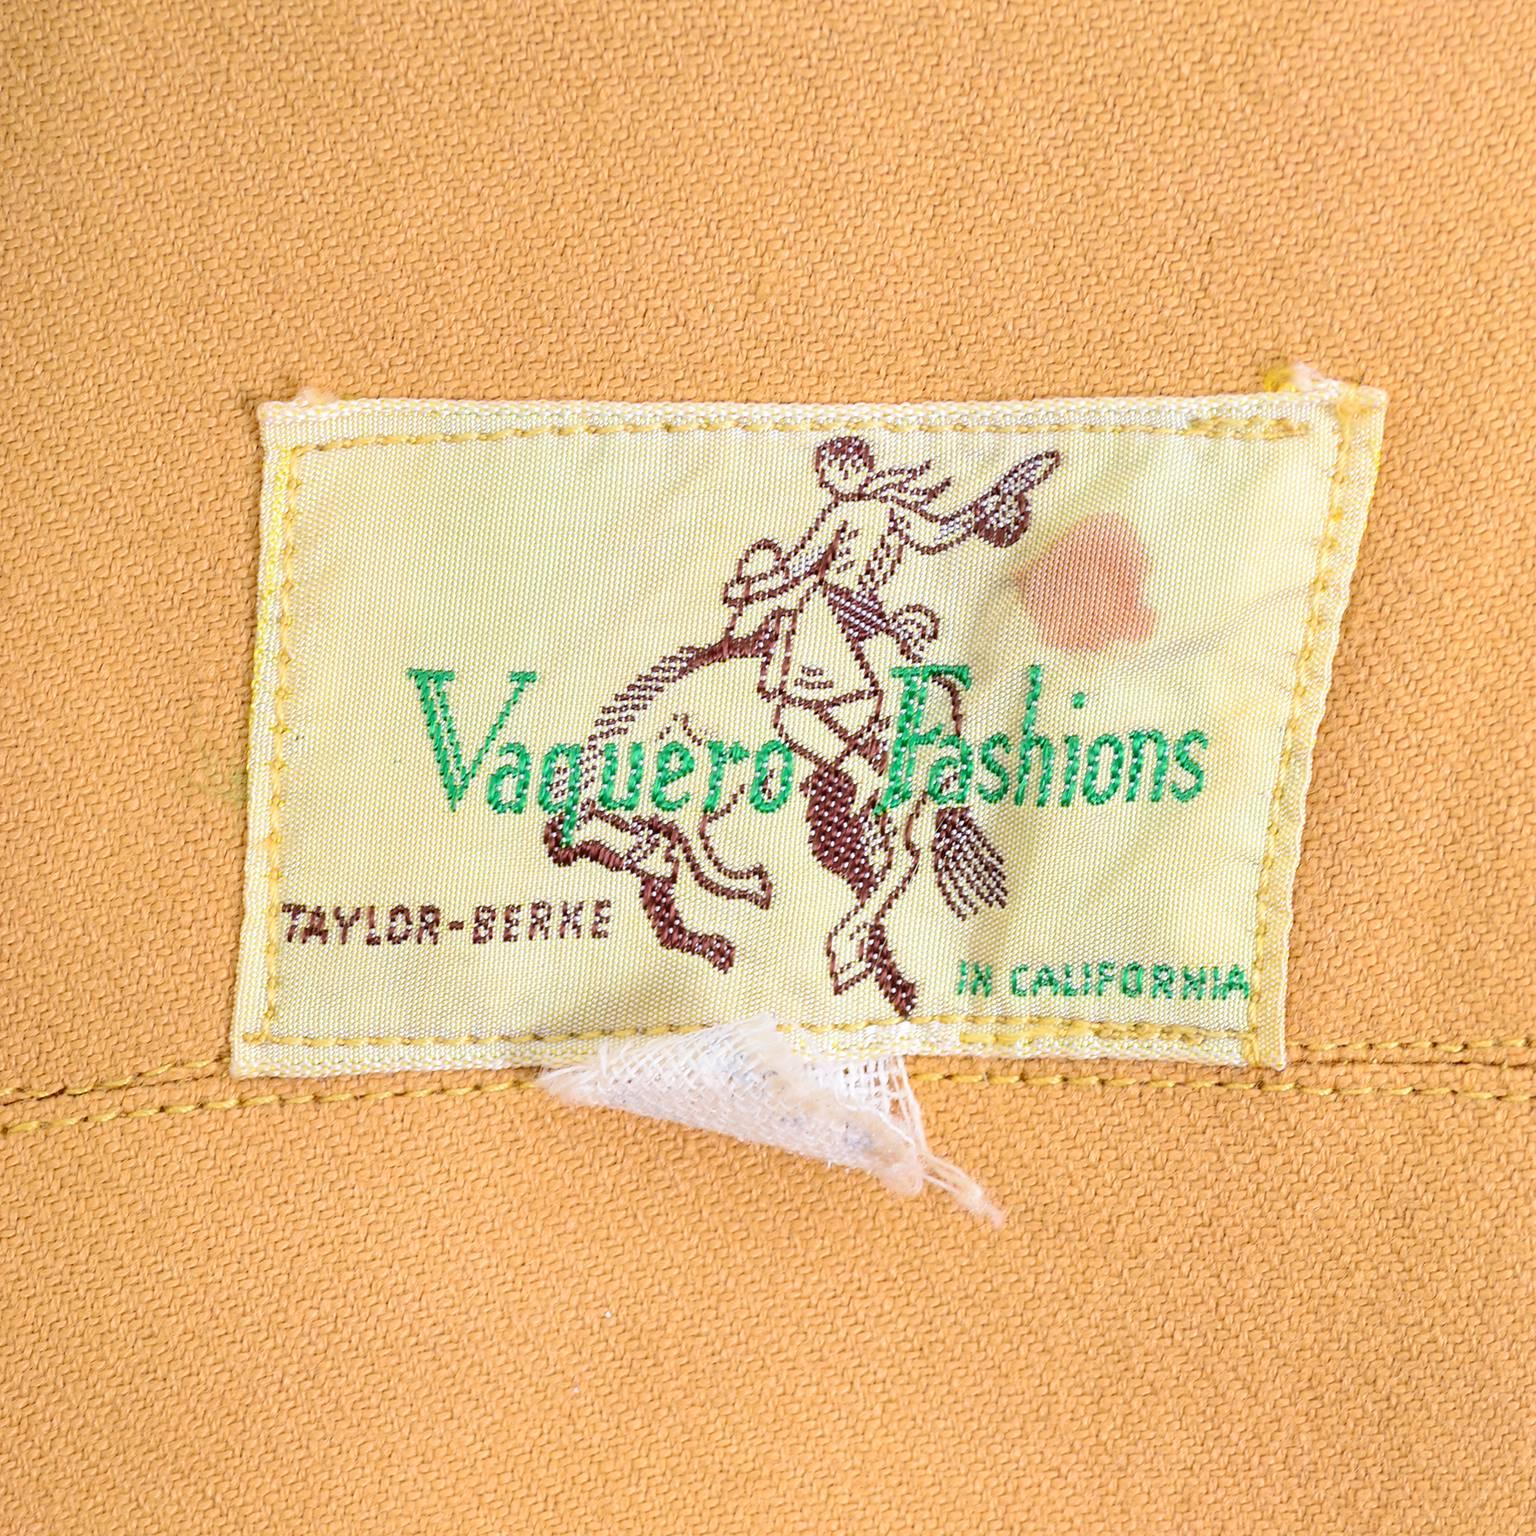 1940s Vaquero Fashions Vintage Cowgirl Western Shirt With Embroidered Flowers  1